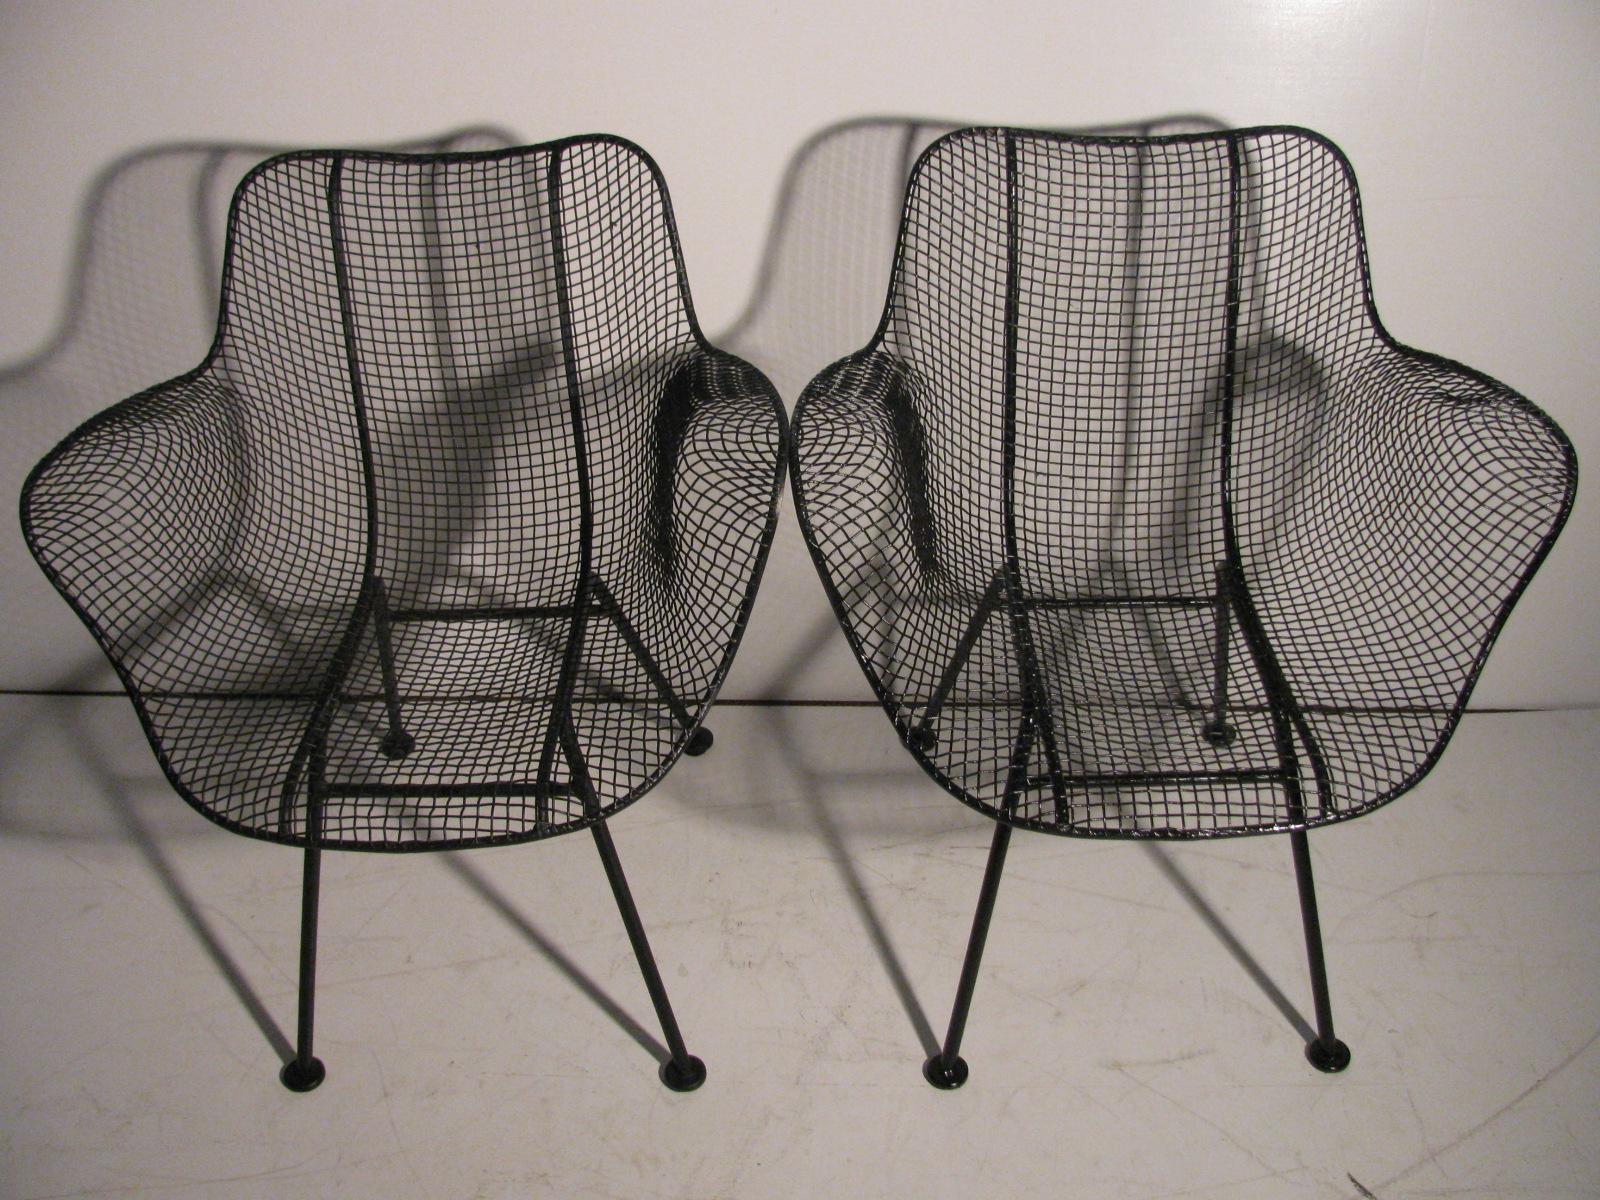 Forged Set of Four Mid-Century Modern Sculptura Iron Chairs by Russell Woodard